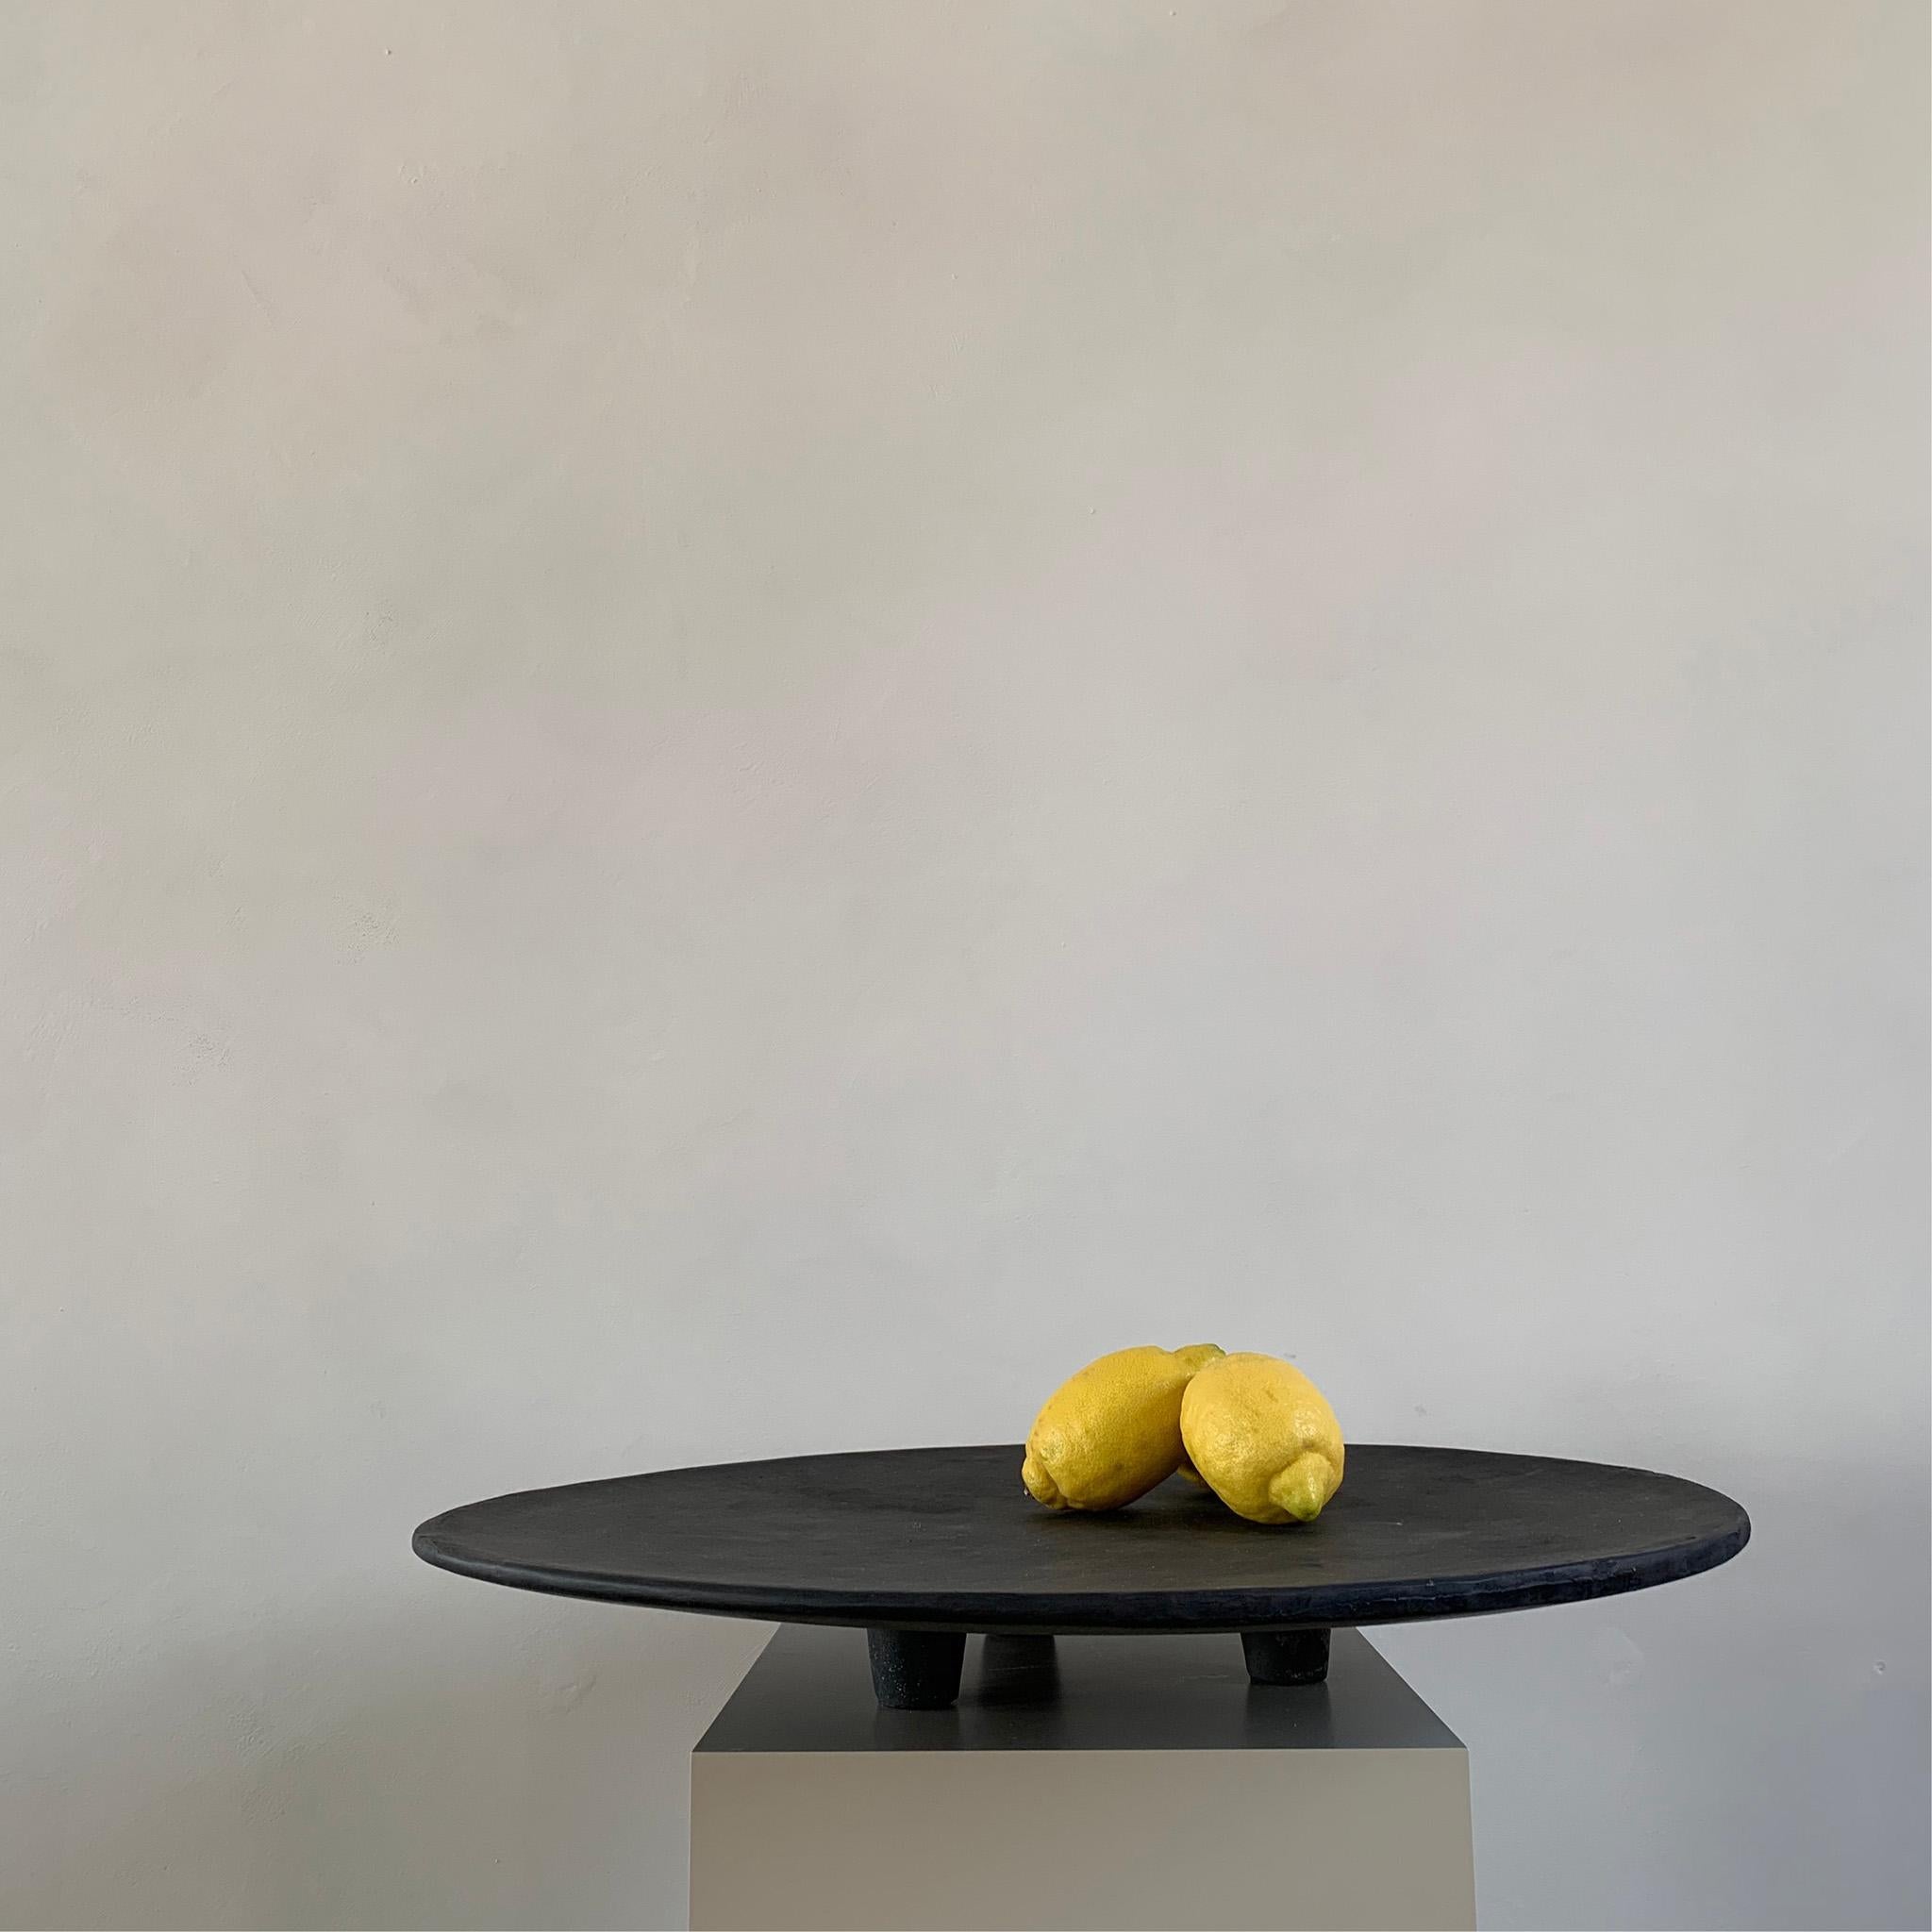 Duck Tray Big by 101 Copenhagen
Designed by Nicolaj Nøddesbo & Tommy Hyldahl
Dimensions: L60 / W60 / H10 cm
Materials: Fiber Concrete

The Duck series is exuberant in its expression challenging the simplicity of nature with its rawness into a